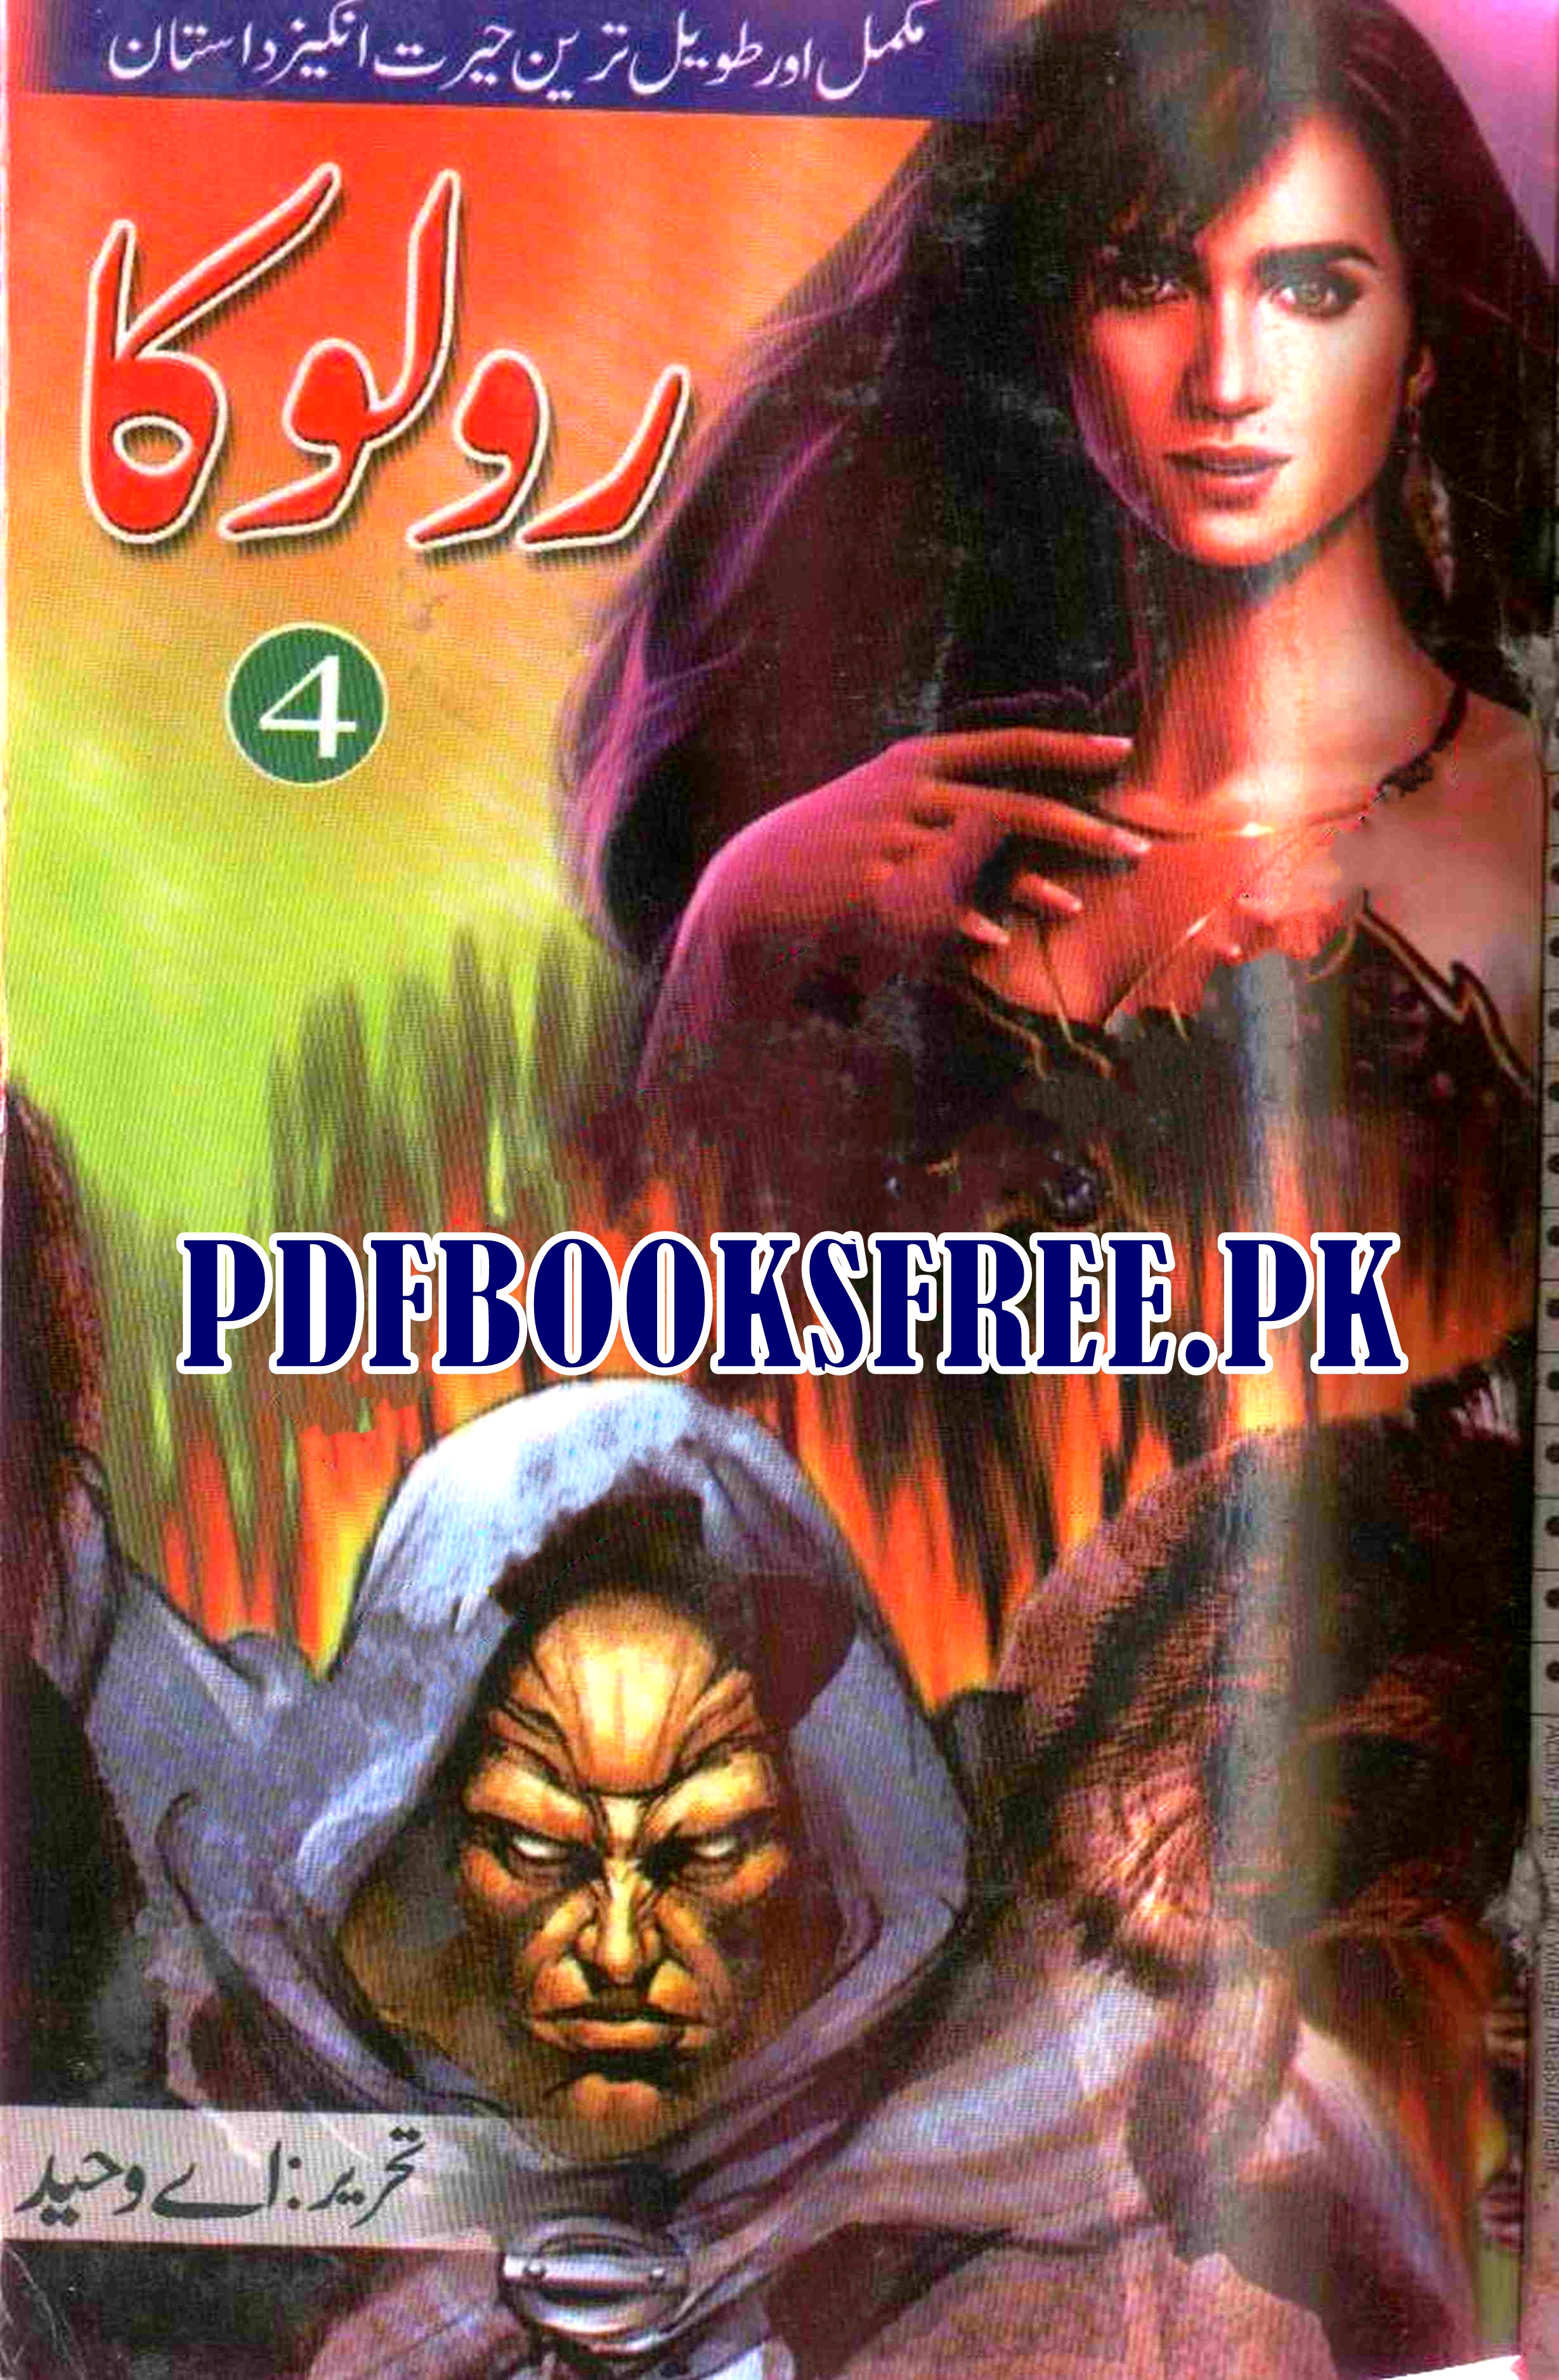 Roloka Novel Part 4 By A Waheed Pdf Free Download